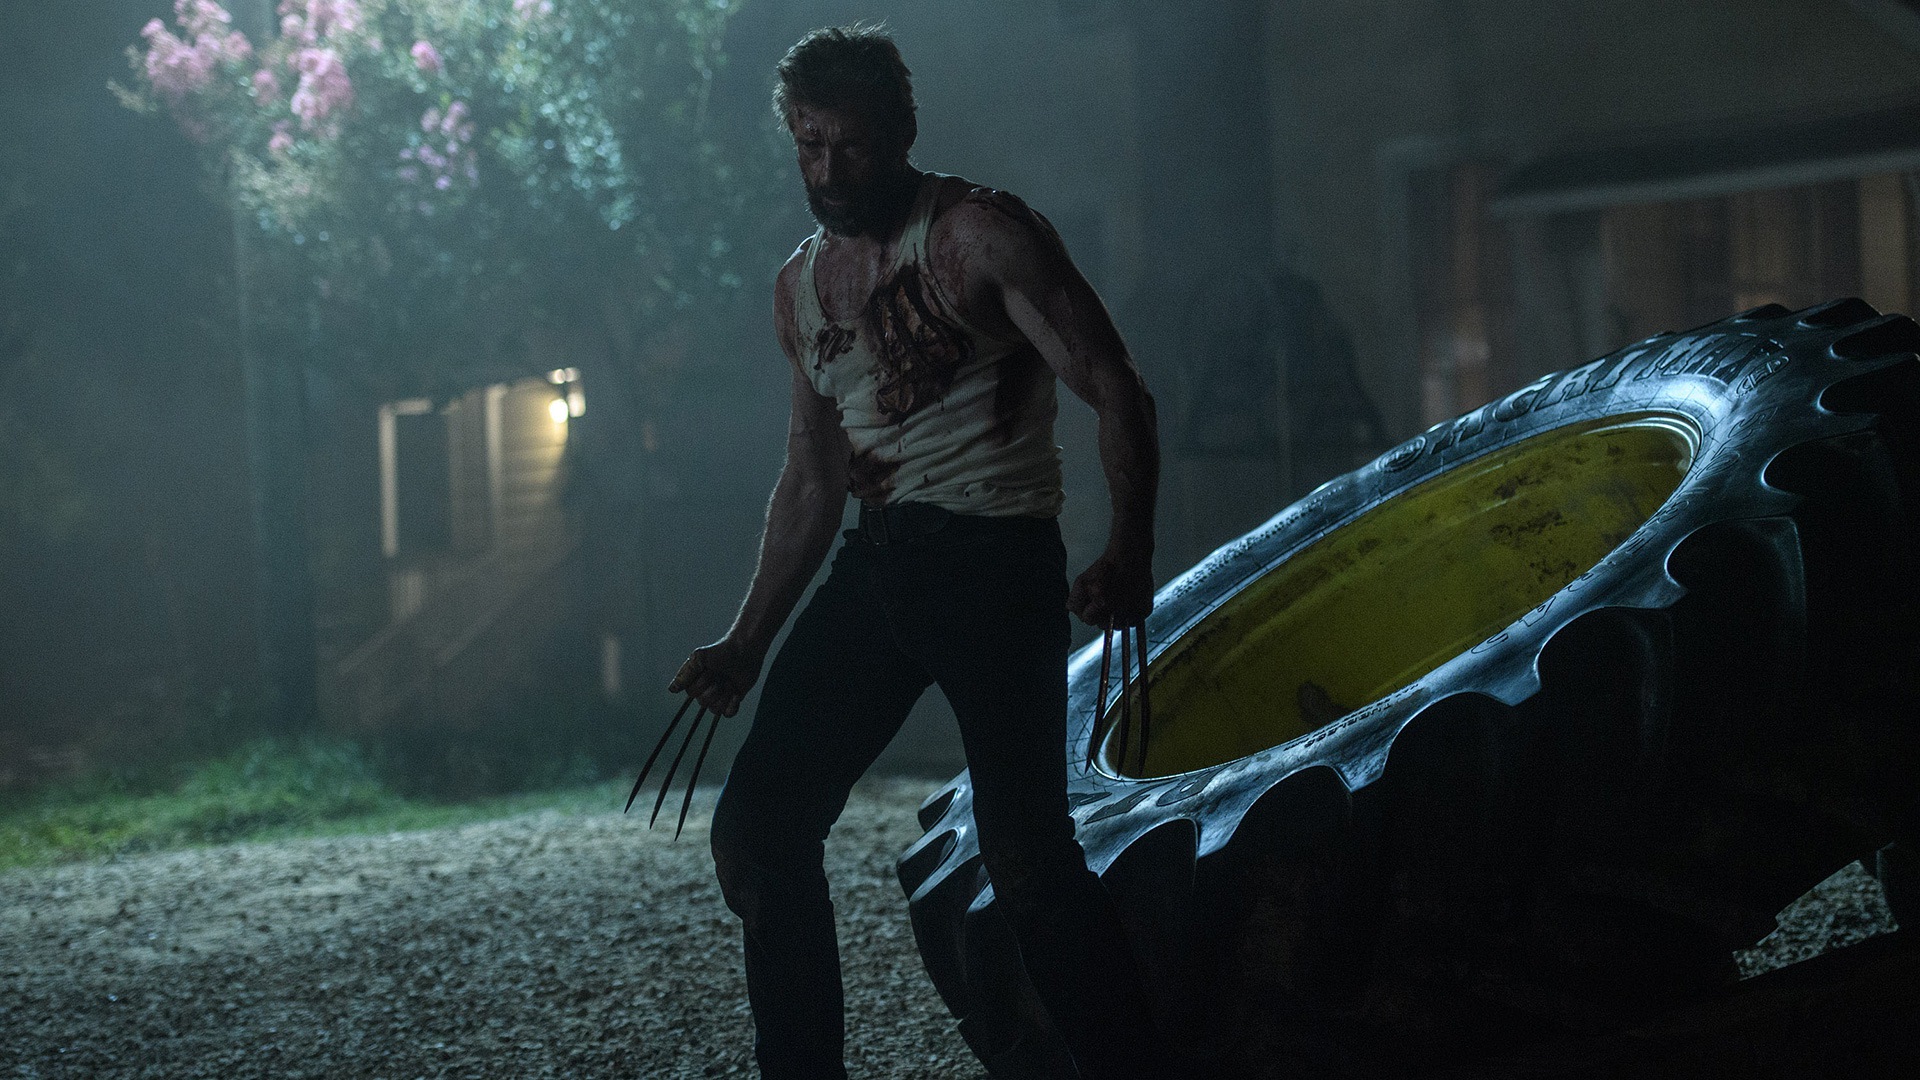 60+ Logan HD Wallpapers and Backgrounds